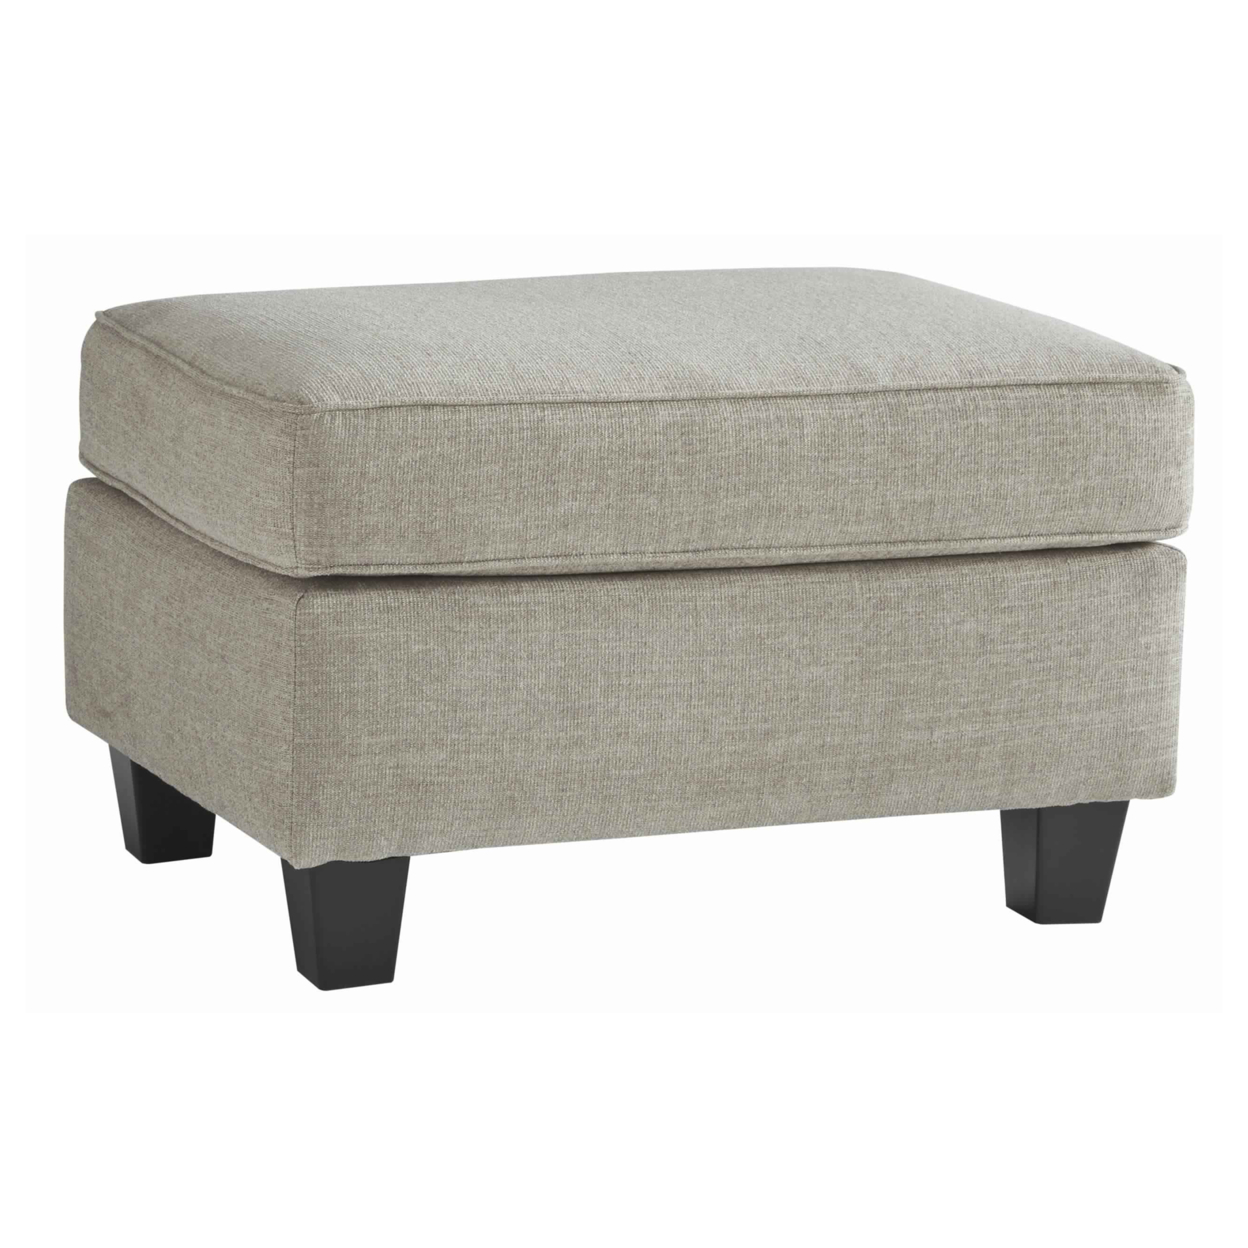 Fabric Upholstered Wooden Ottoman With Welt Trims, Beige And Black- Saltoro Sherpi